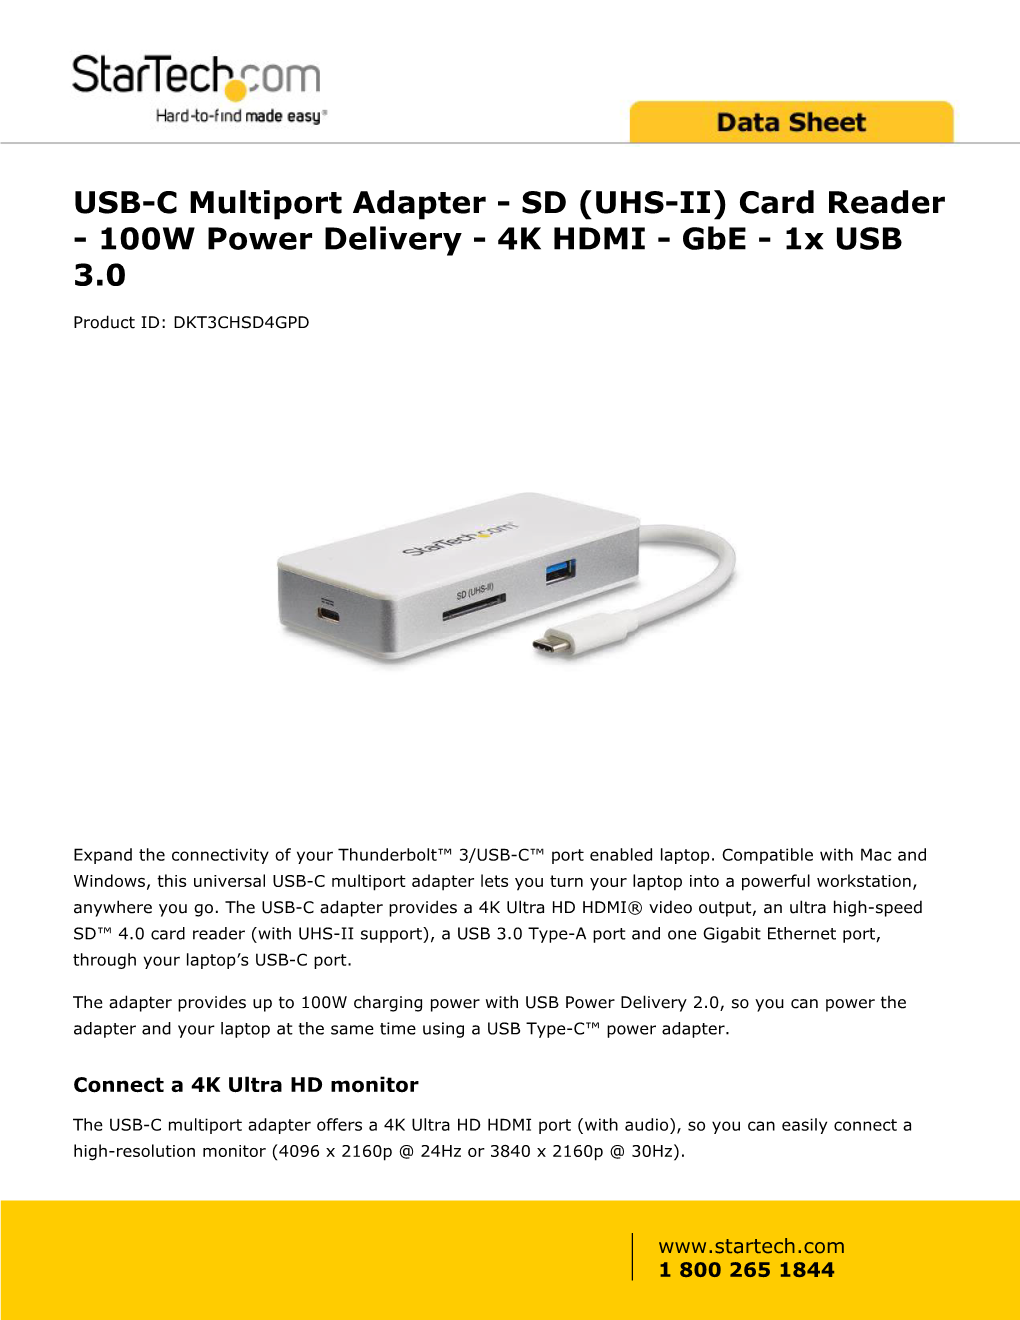 USB-C Multiport Adapter - SD (UHS-II) Card Reader - 100W Power Delivery - 4K HDMI - Gbe - 1X USB 3.0